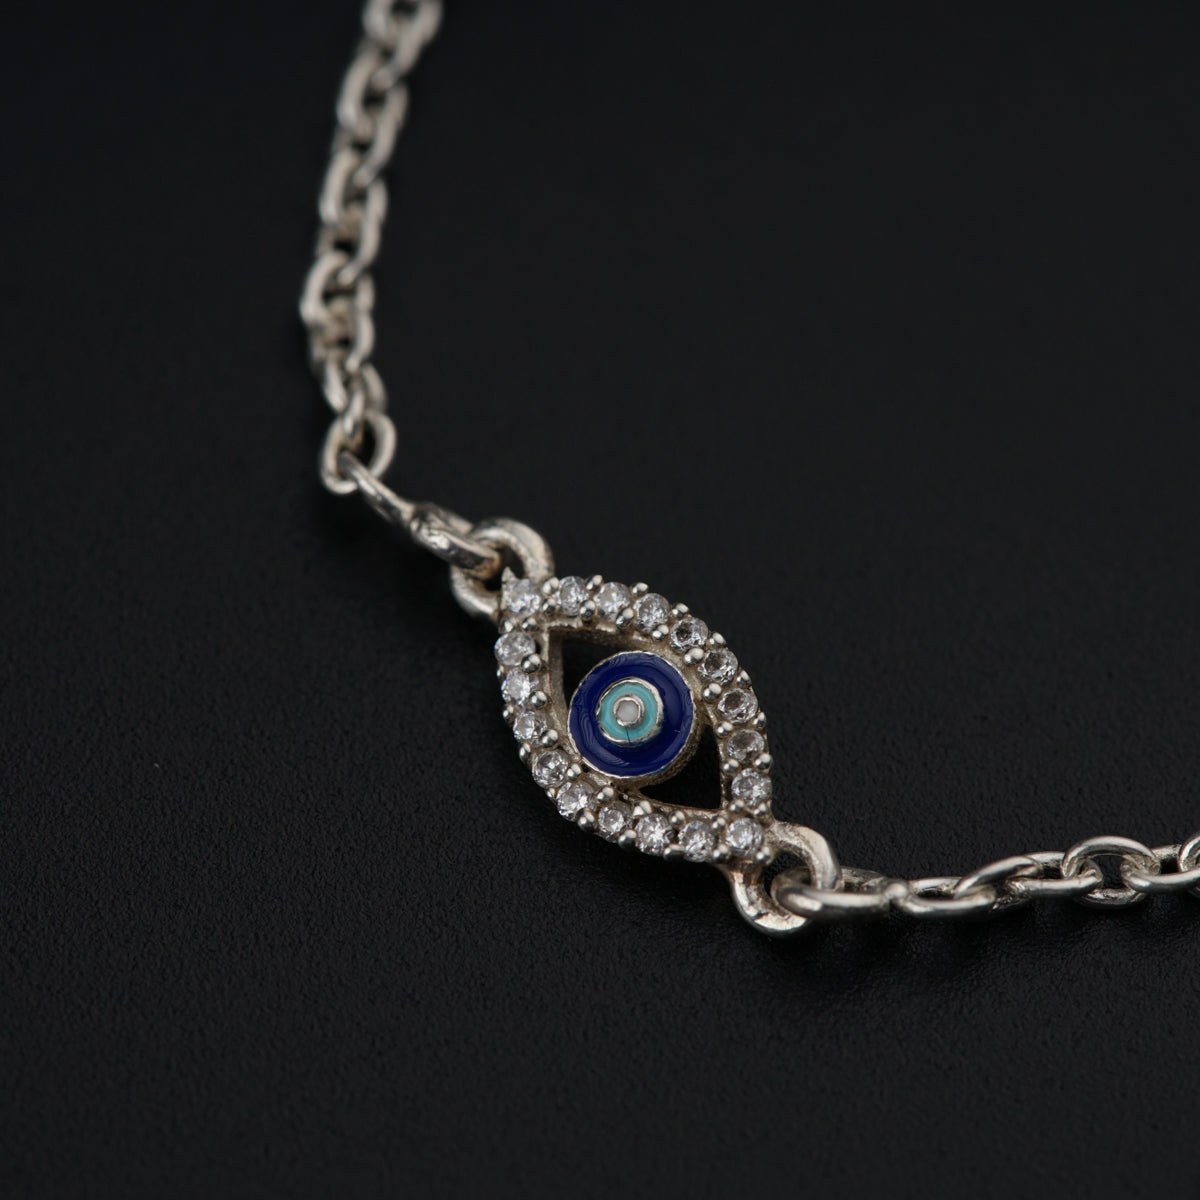 a silver chain with a blue evil eye on it